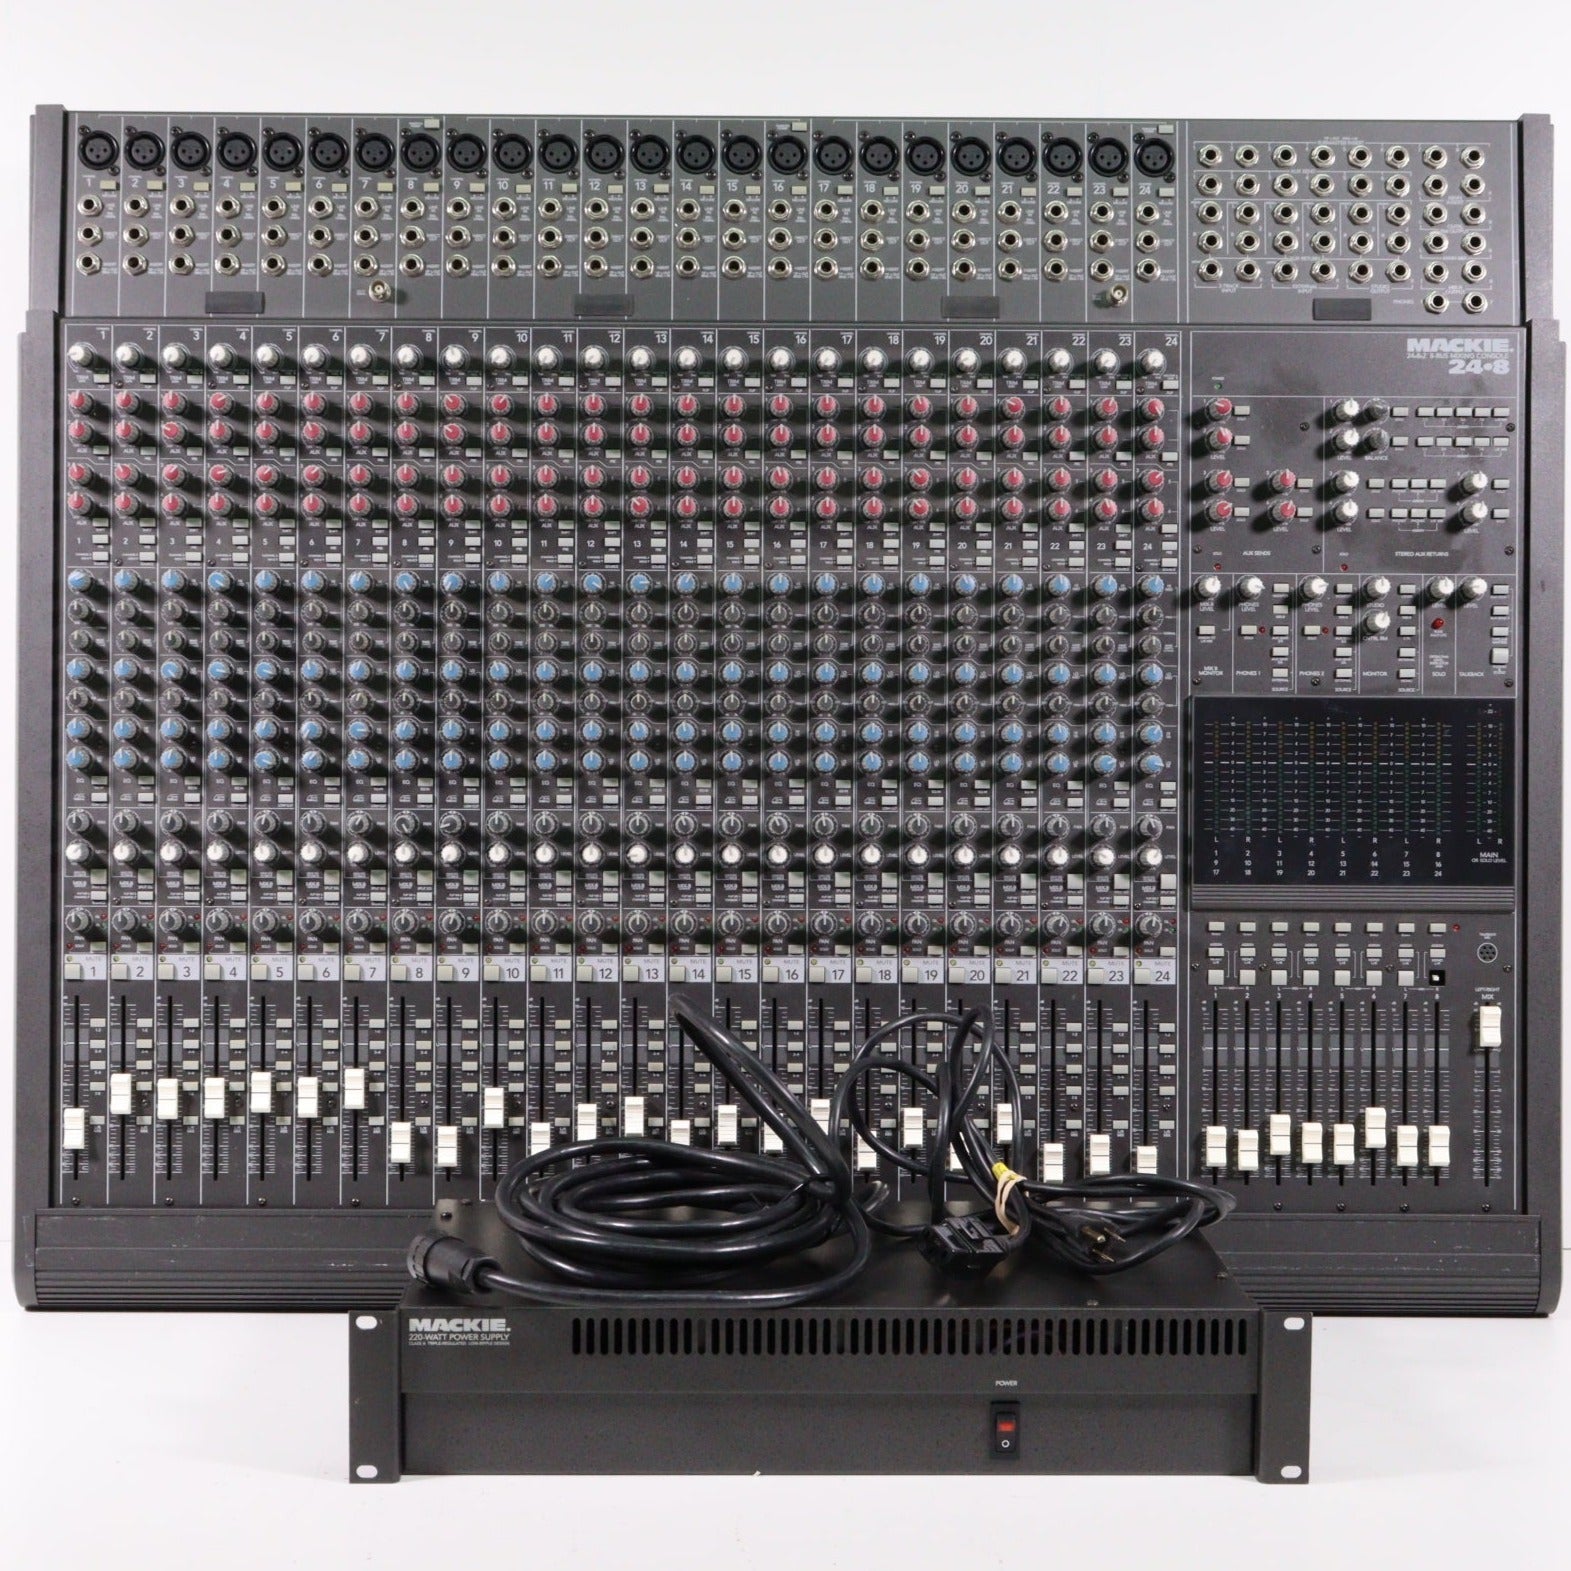 KH Audio Mixer 8 Channel Audio Mixer Sound Mixing Console at Rs